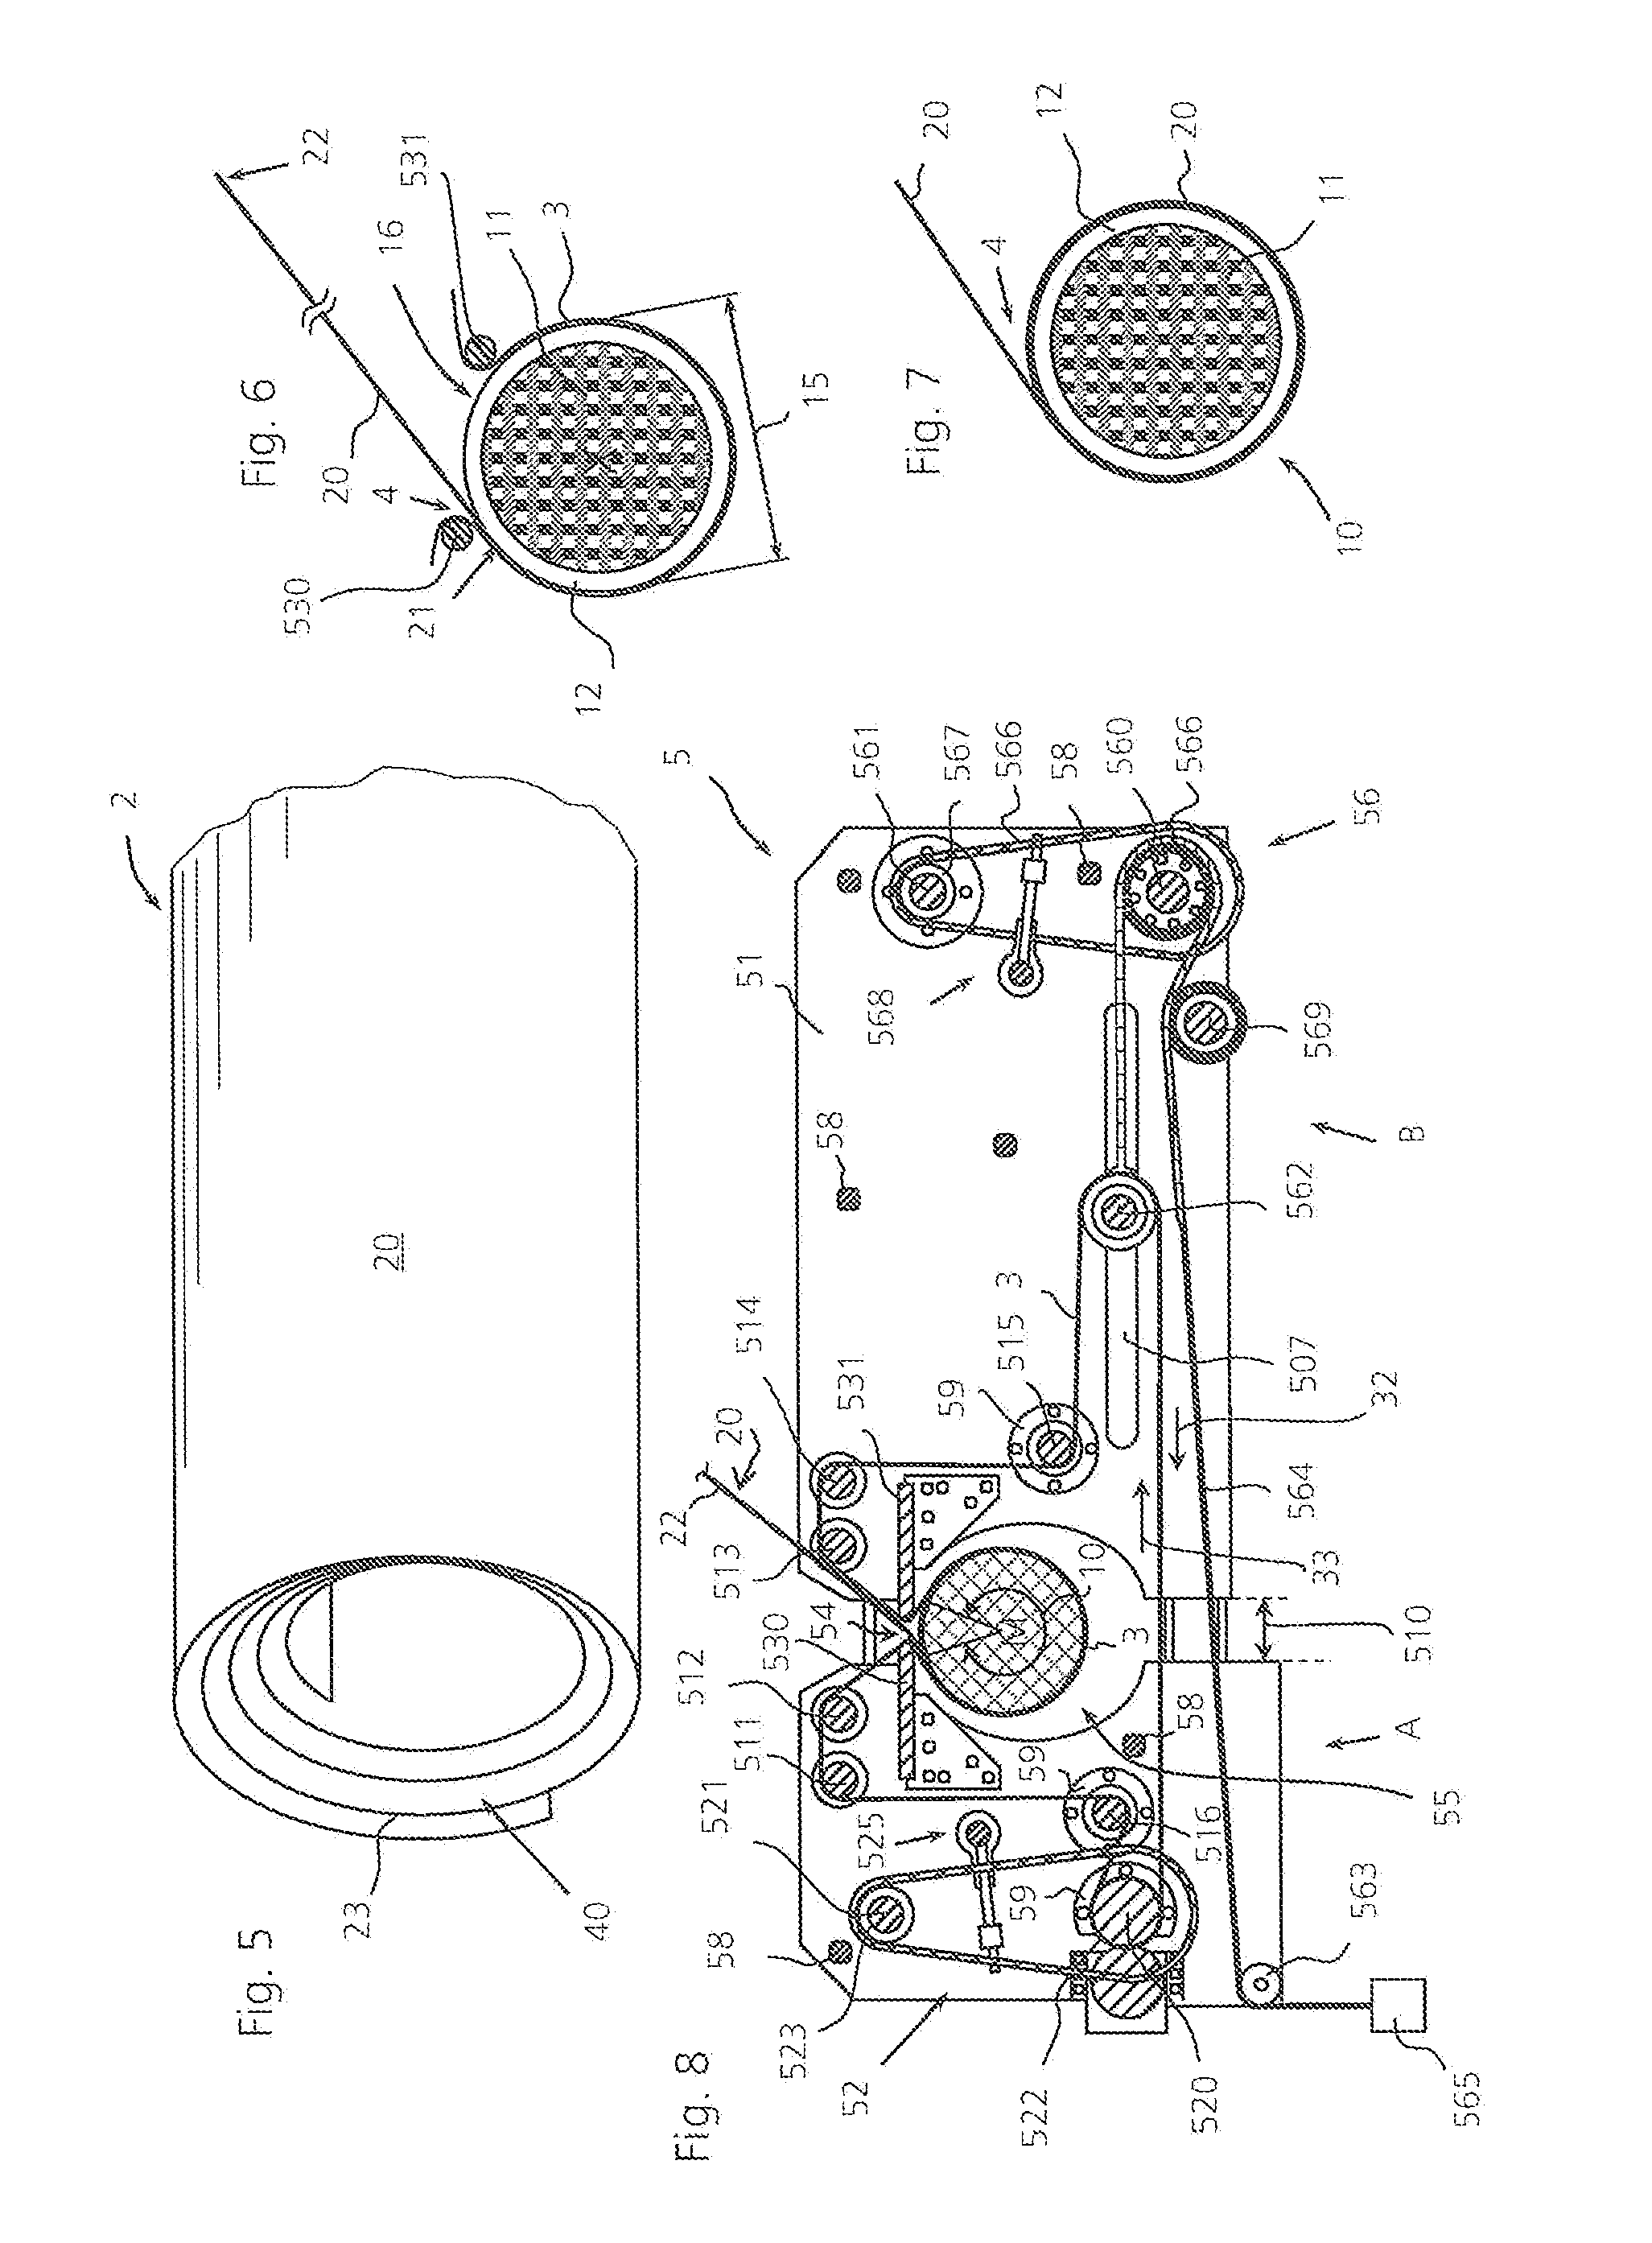 Method for encasing a body of an exhaust gas system